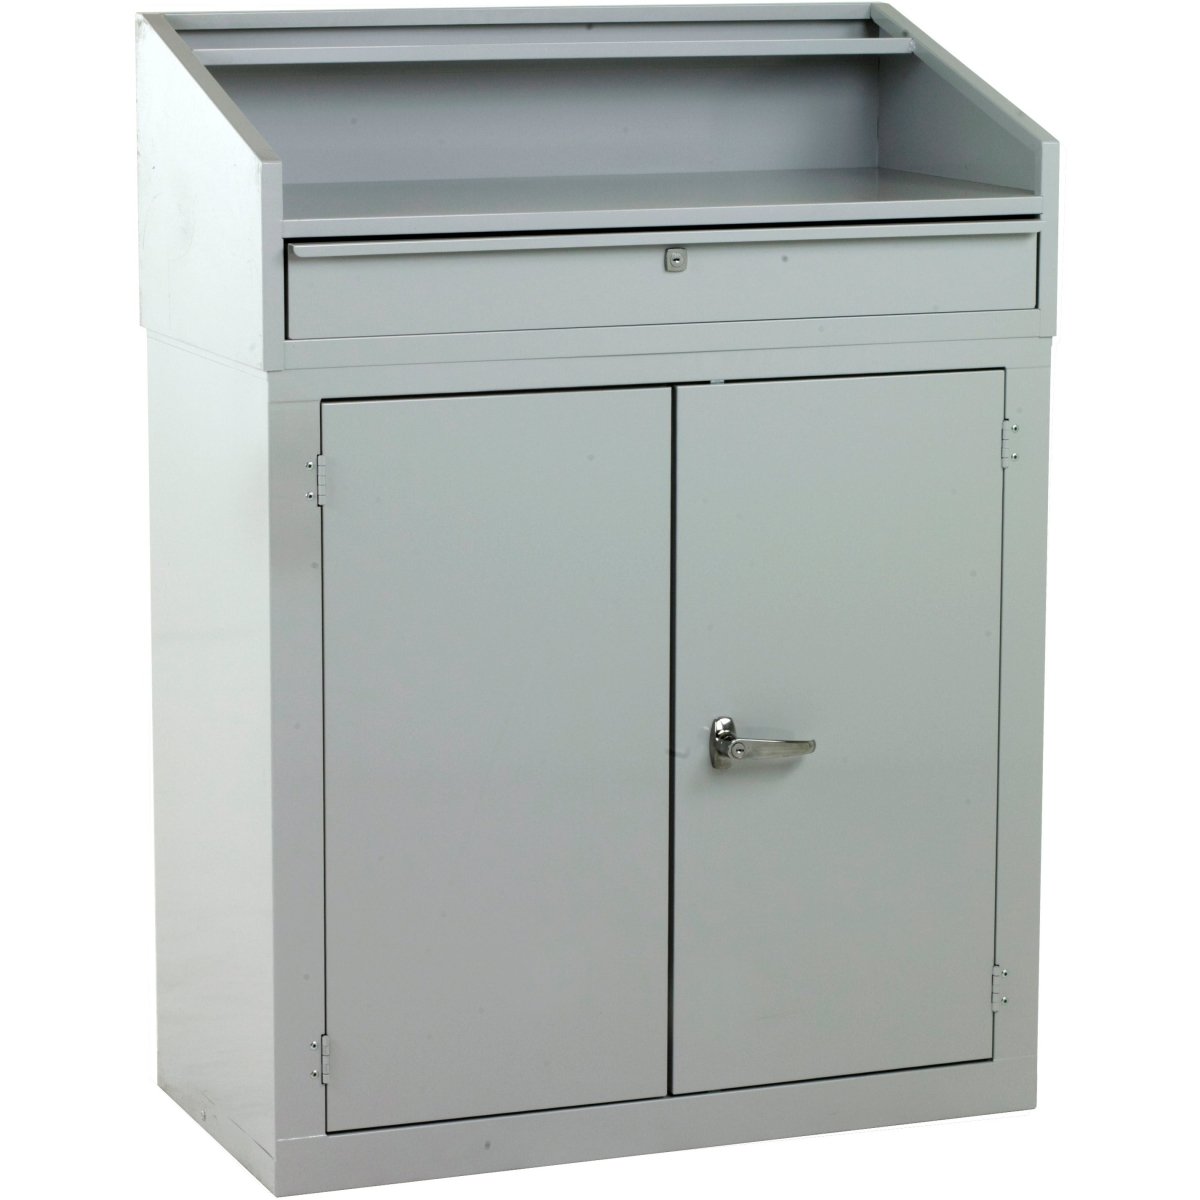 Foreman's Cupboard Desk - Warehouse Storage Products